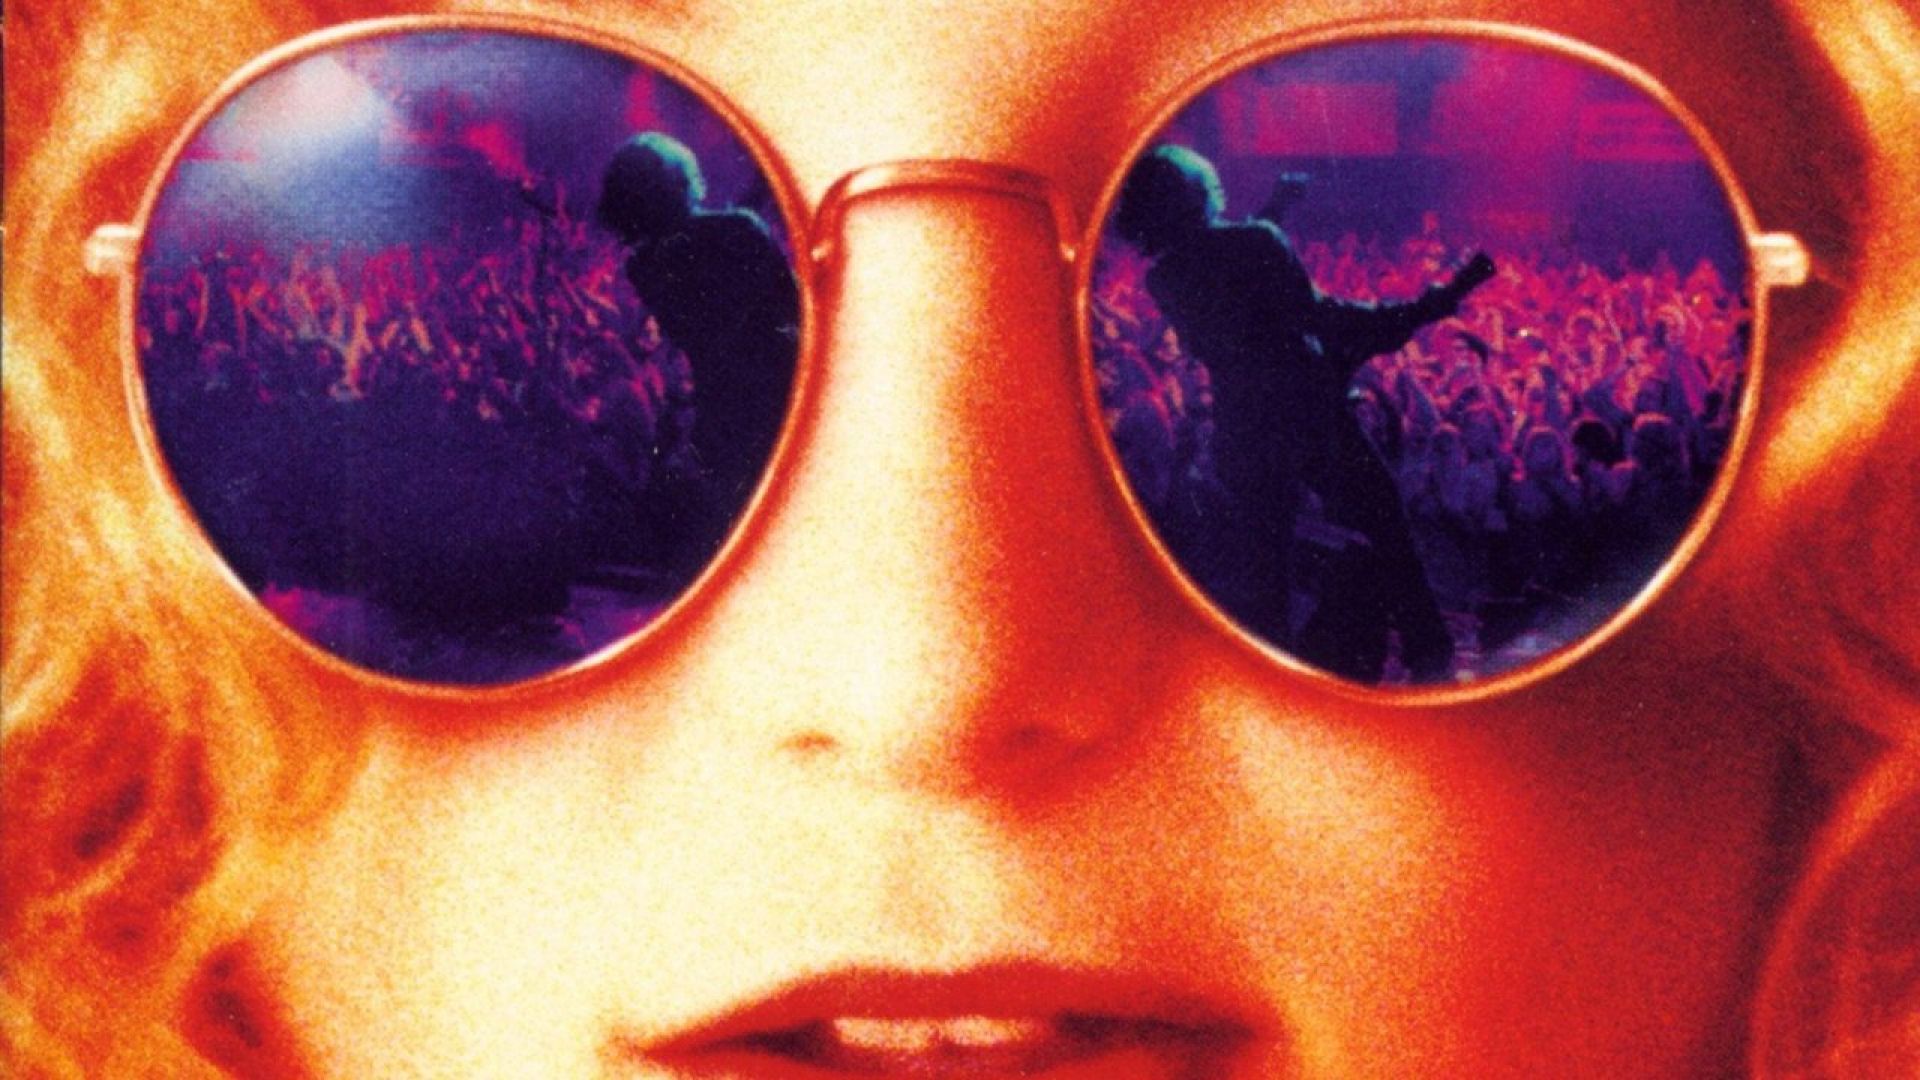 Poll: What’s your favorite Cameron Crowe film?